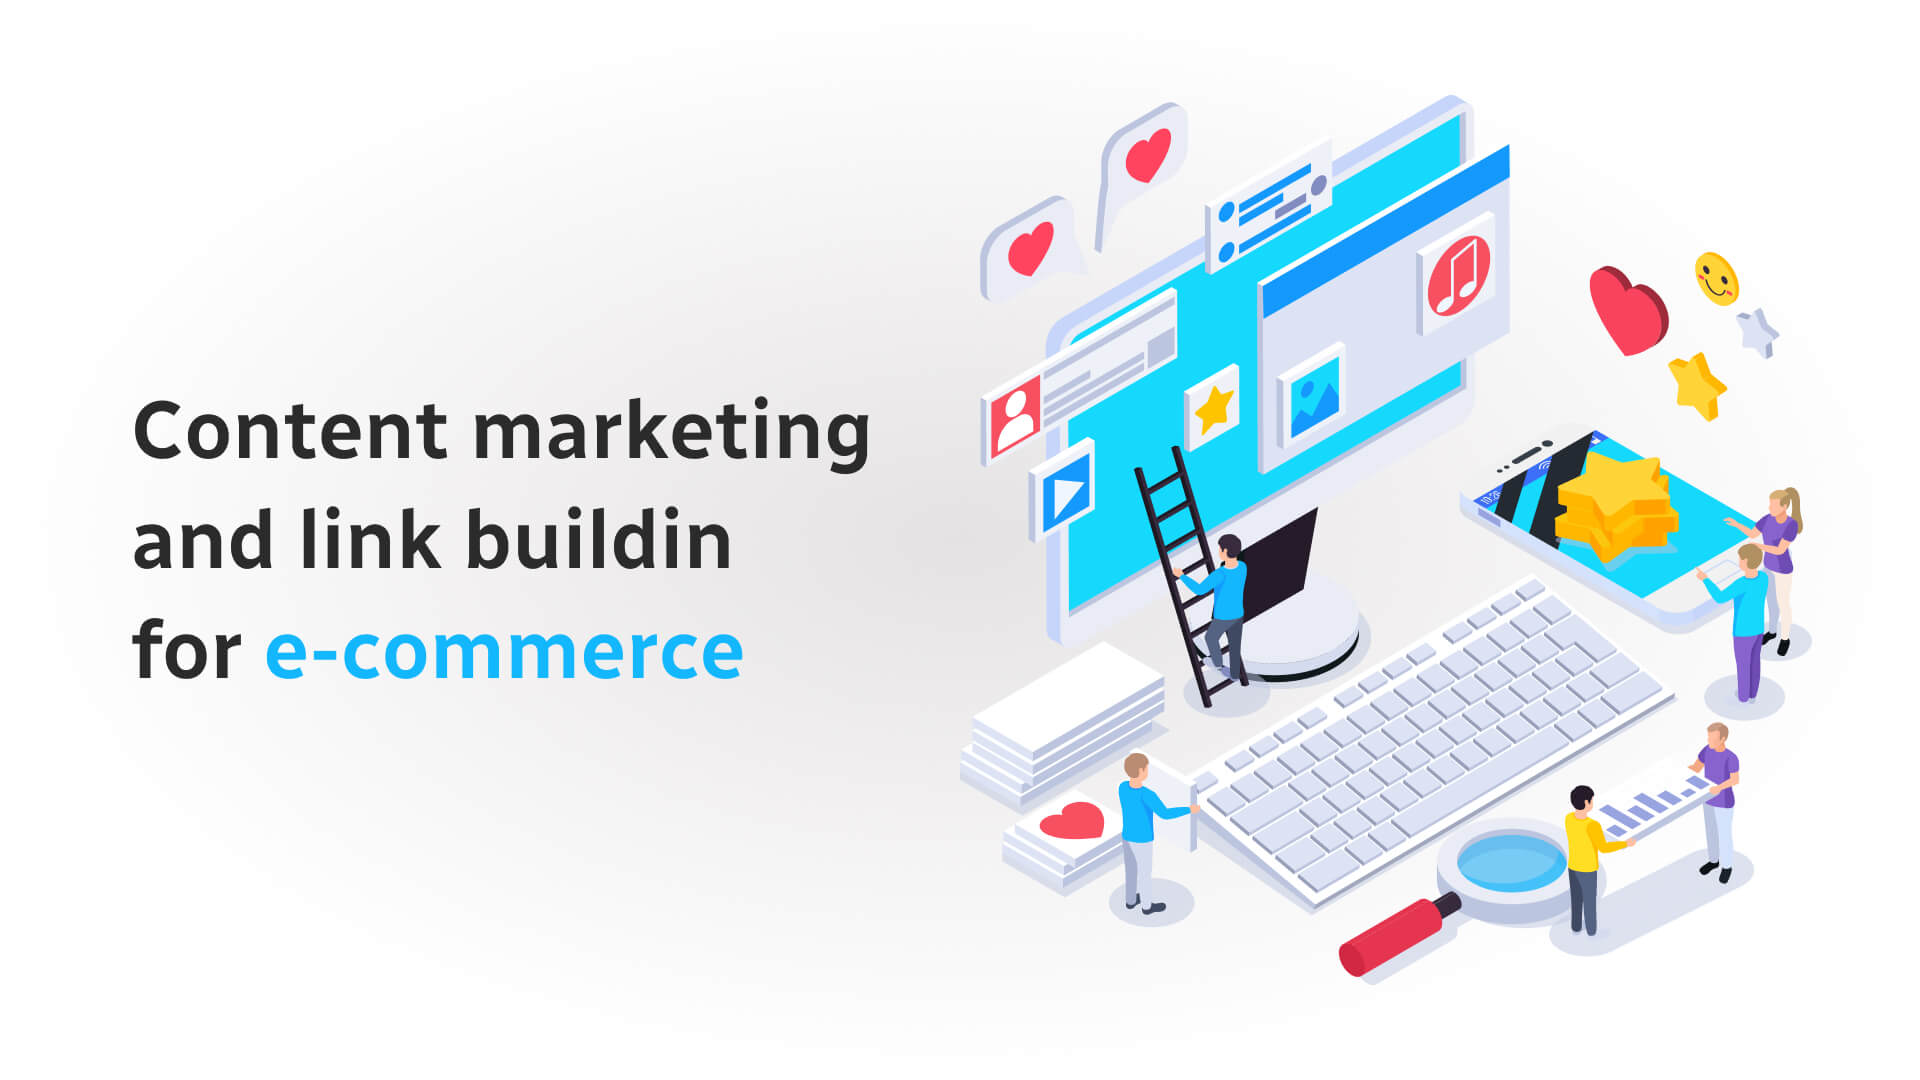 Content marketing and link building for e-commerce